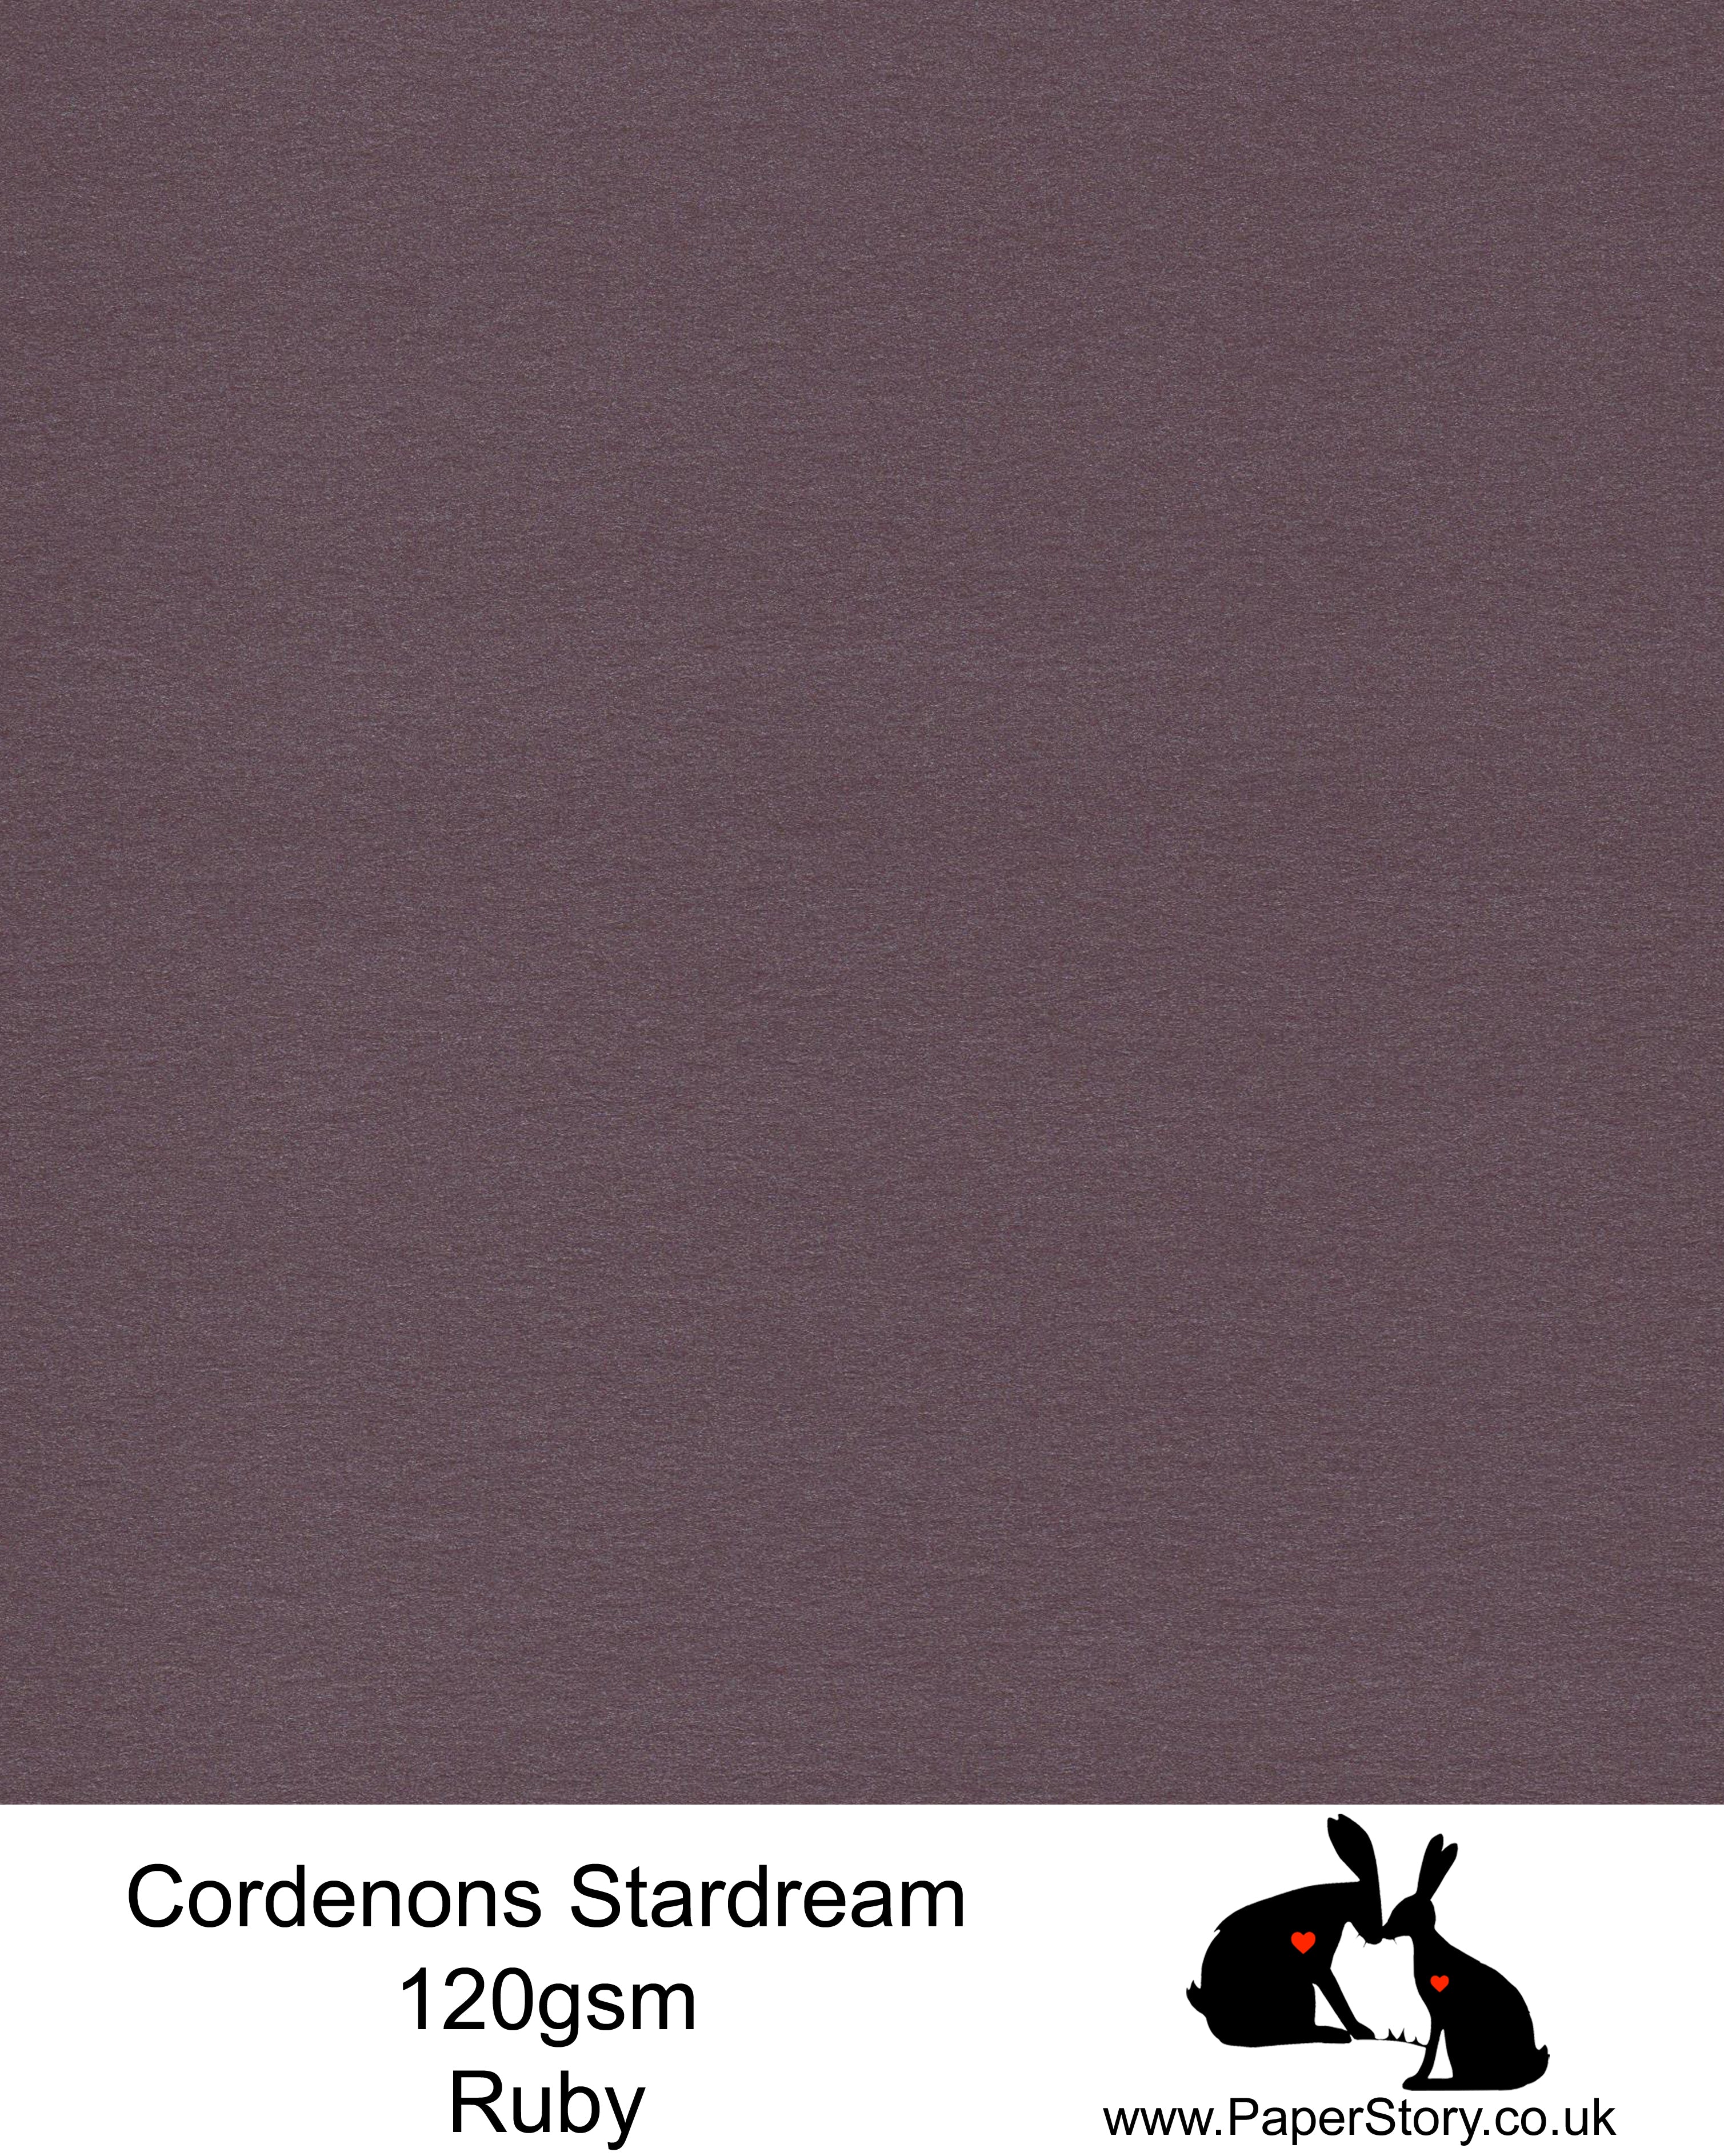 A4 Stardream 120gsm paper for Papercutting, craft, flower making  and wedding stationery. Deep Ruby red purple colour. Stardream is a luxury Italian paper from Italy, it is a double sided quality Pearlescent paper with a matching colour core. FSC Certified, acid free, archival and PH Neutral